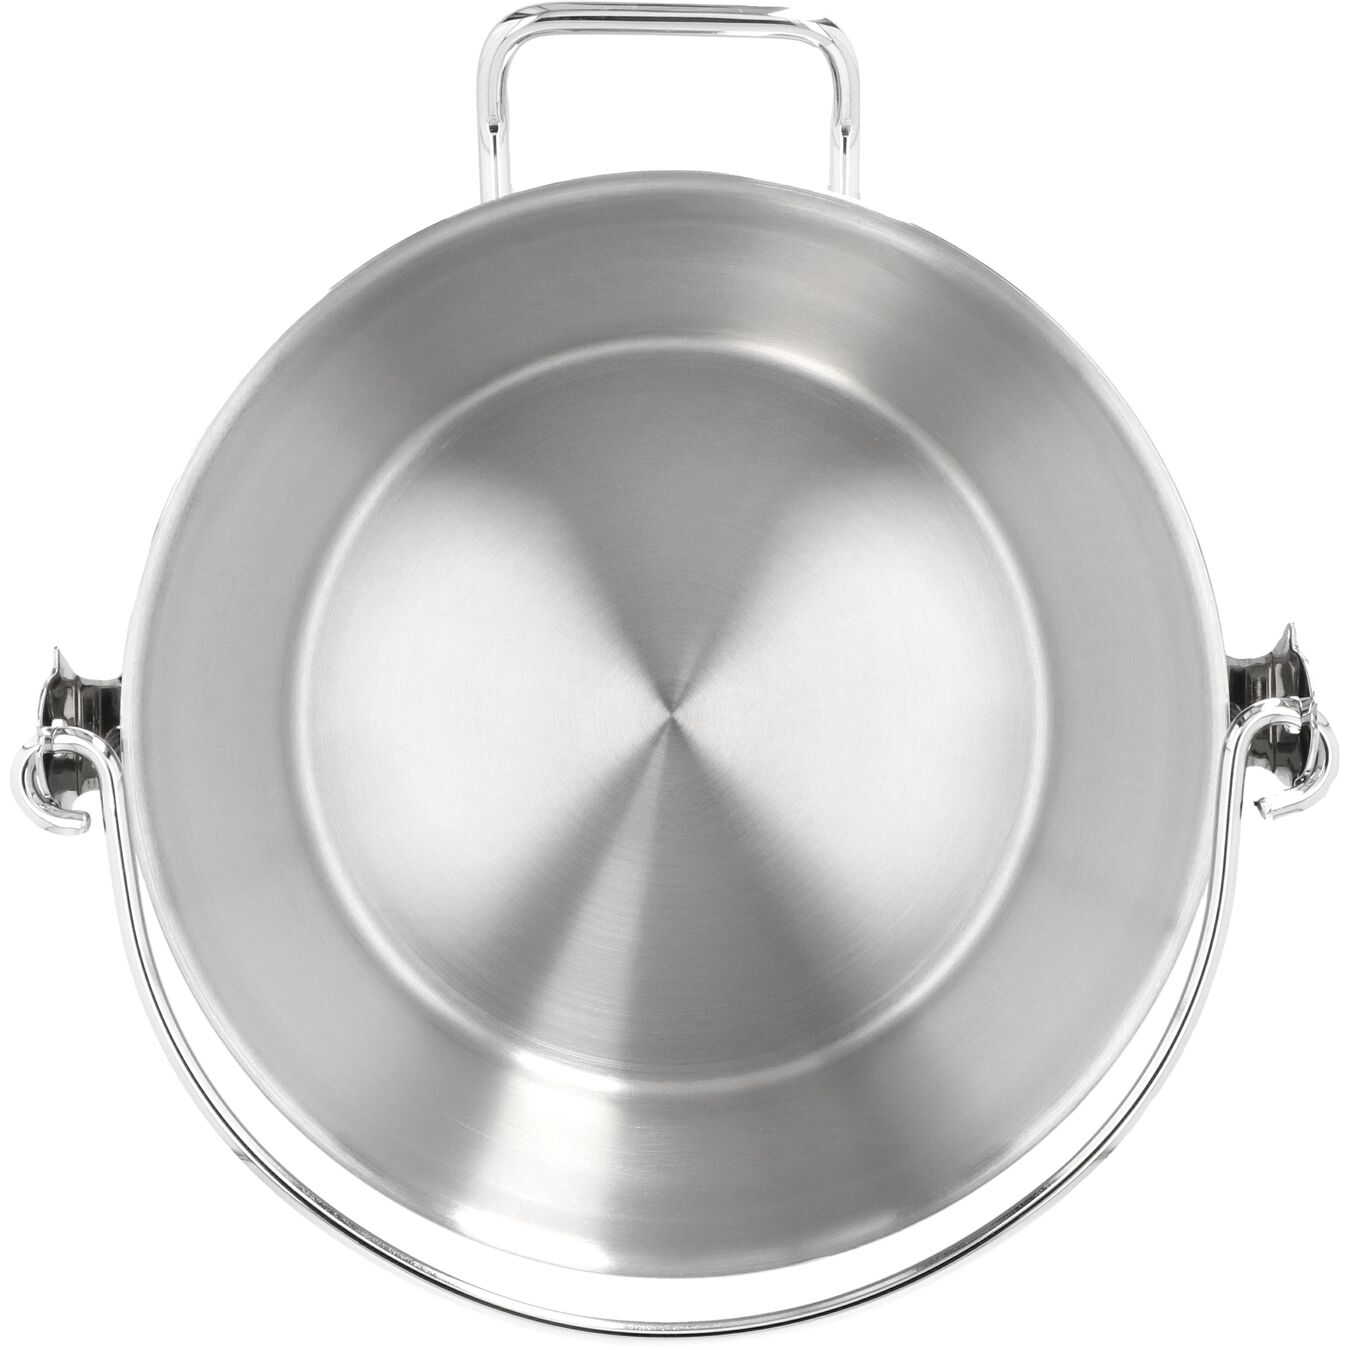 10.6 qt, 18/10 Stainless Steel, Maslin Pan,,large 7